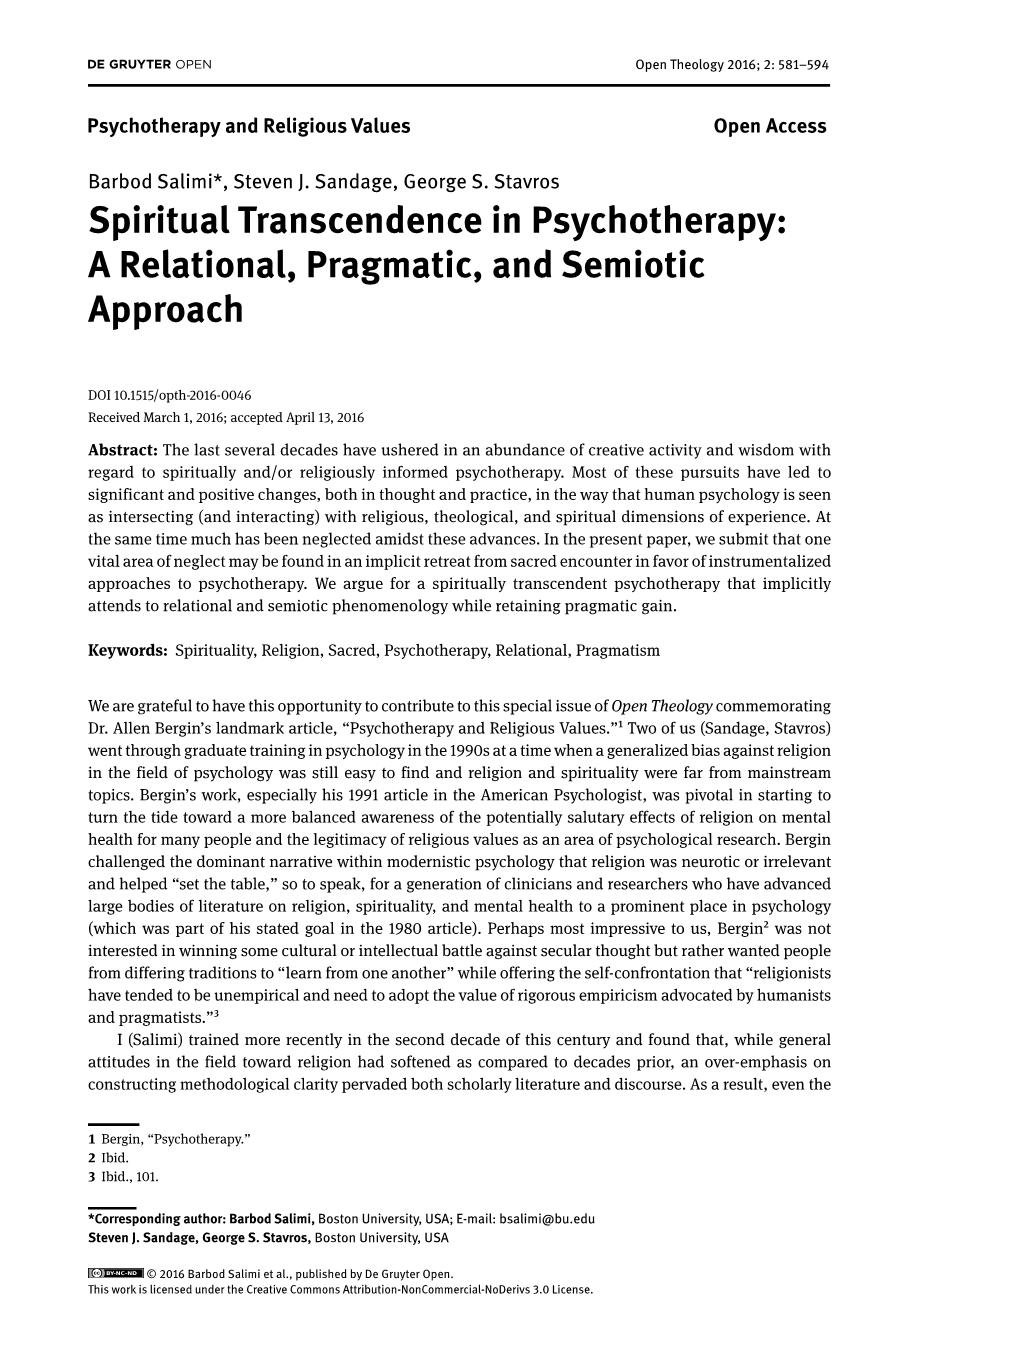 Spiritual Transcendence in Psychotherapy: a Relational, Pragmatic, and Semiotic Approach